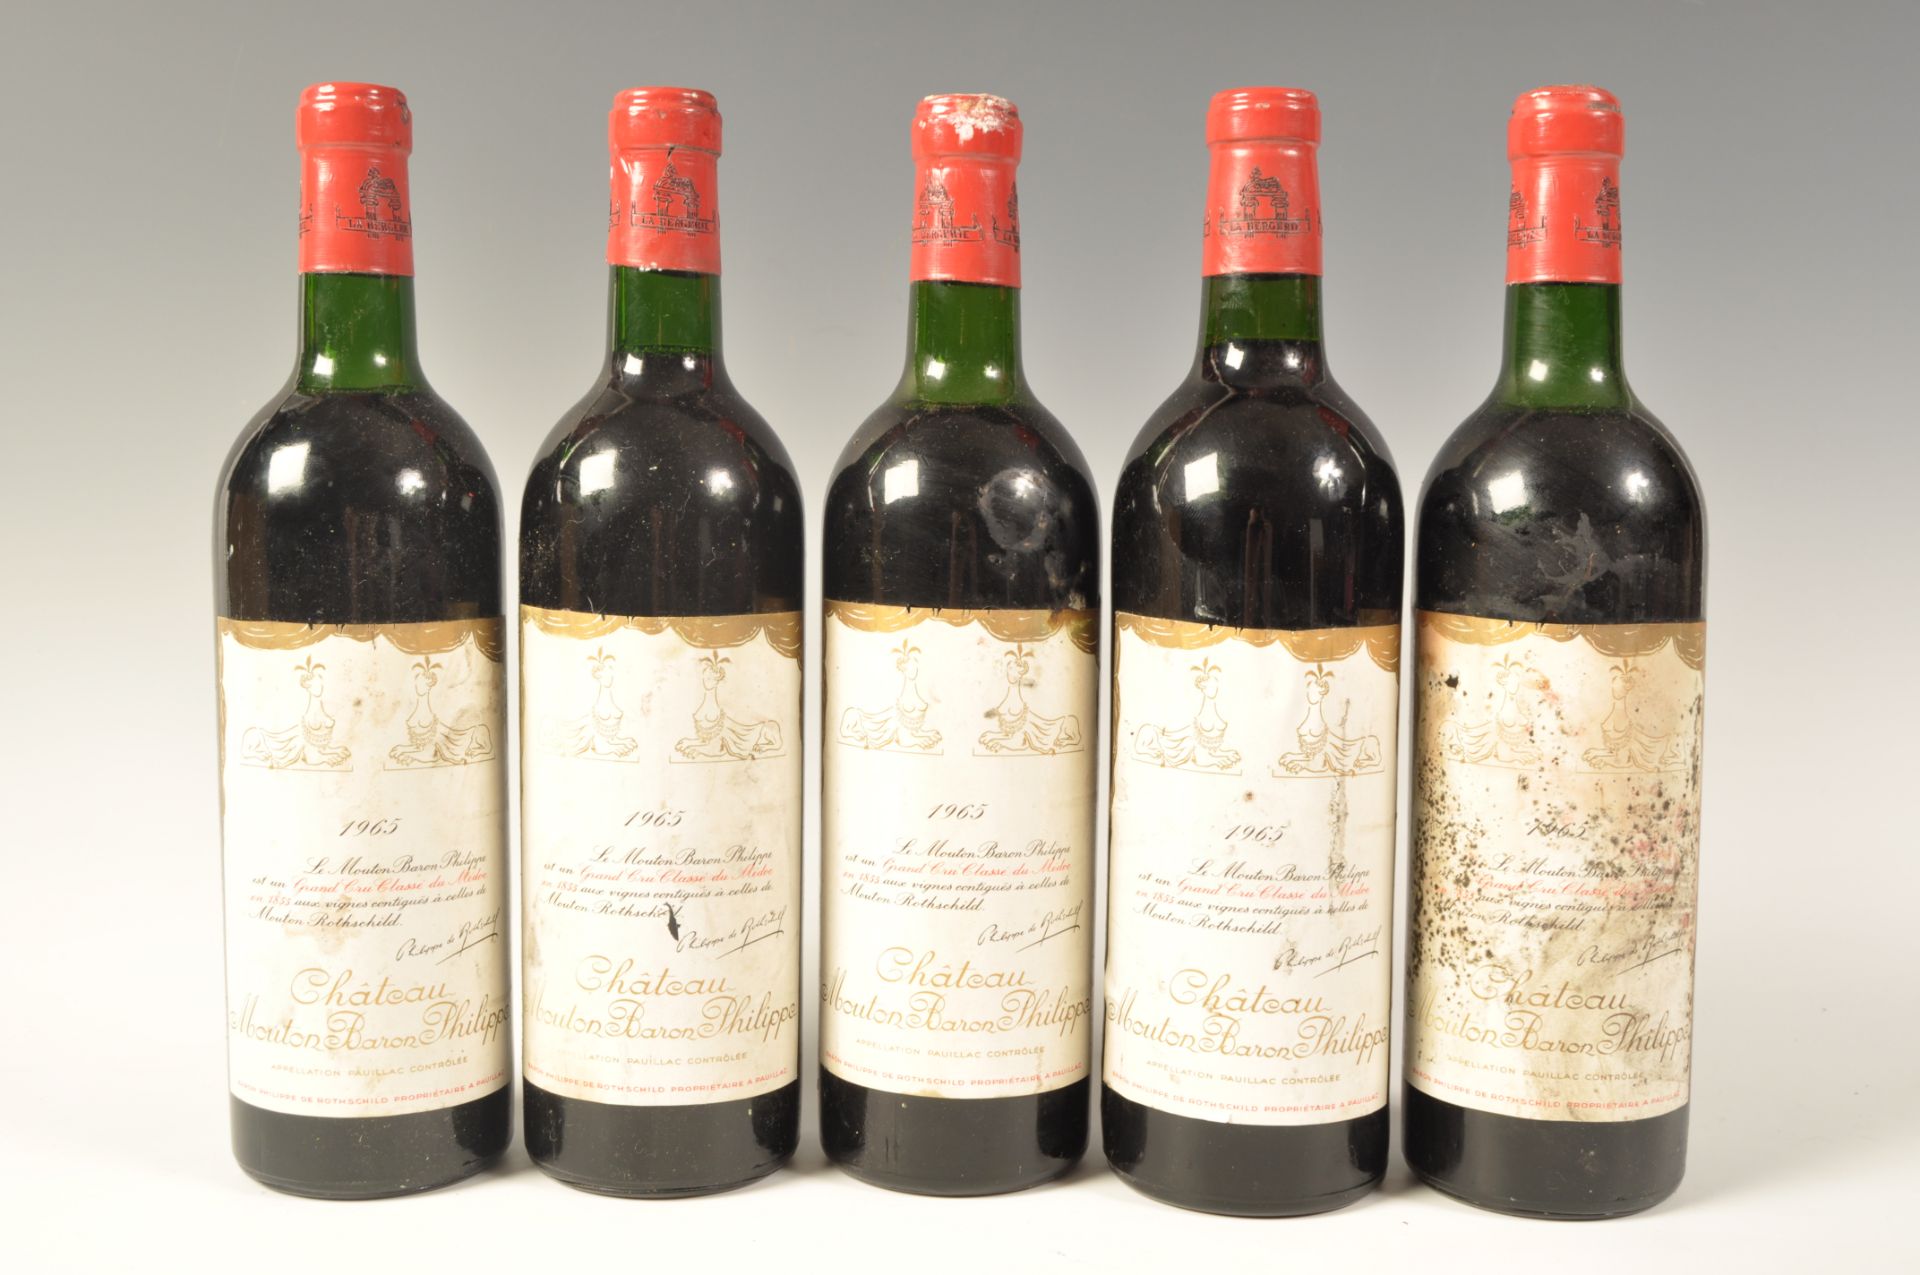 5 BOTTLES OF 1965 CHATEAU MOUTON BARON PHILIPPE RED WINE